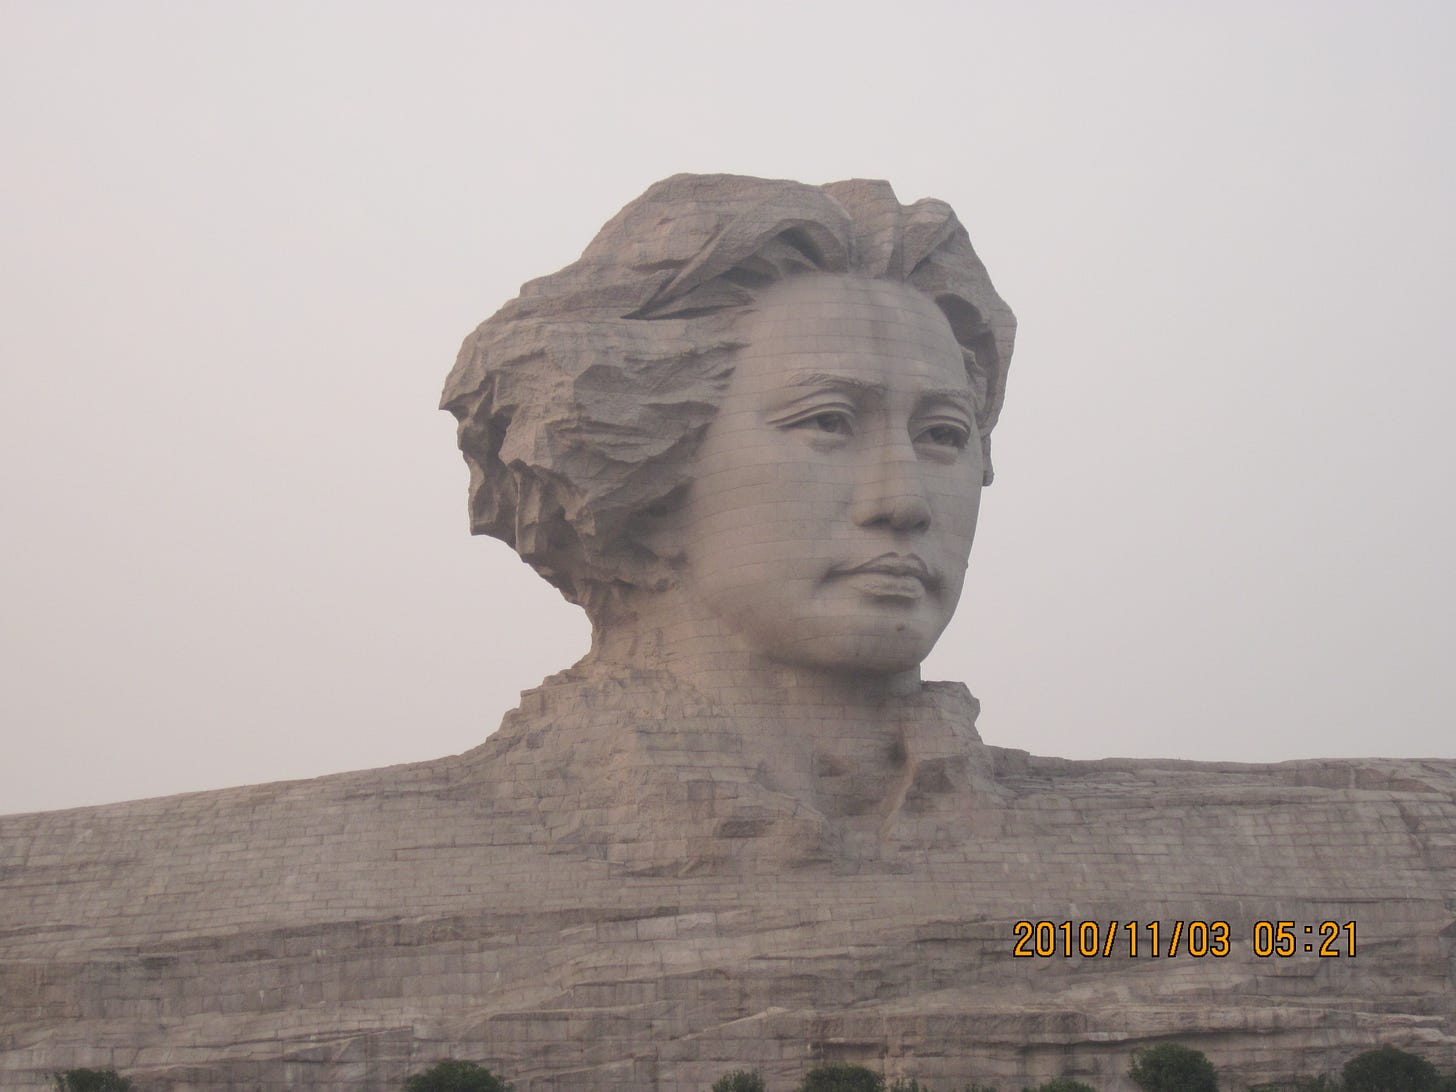 Photo of the gigantic statue of Mao Zedong as a young man, looking rather dashing and windswept